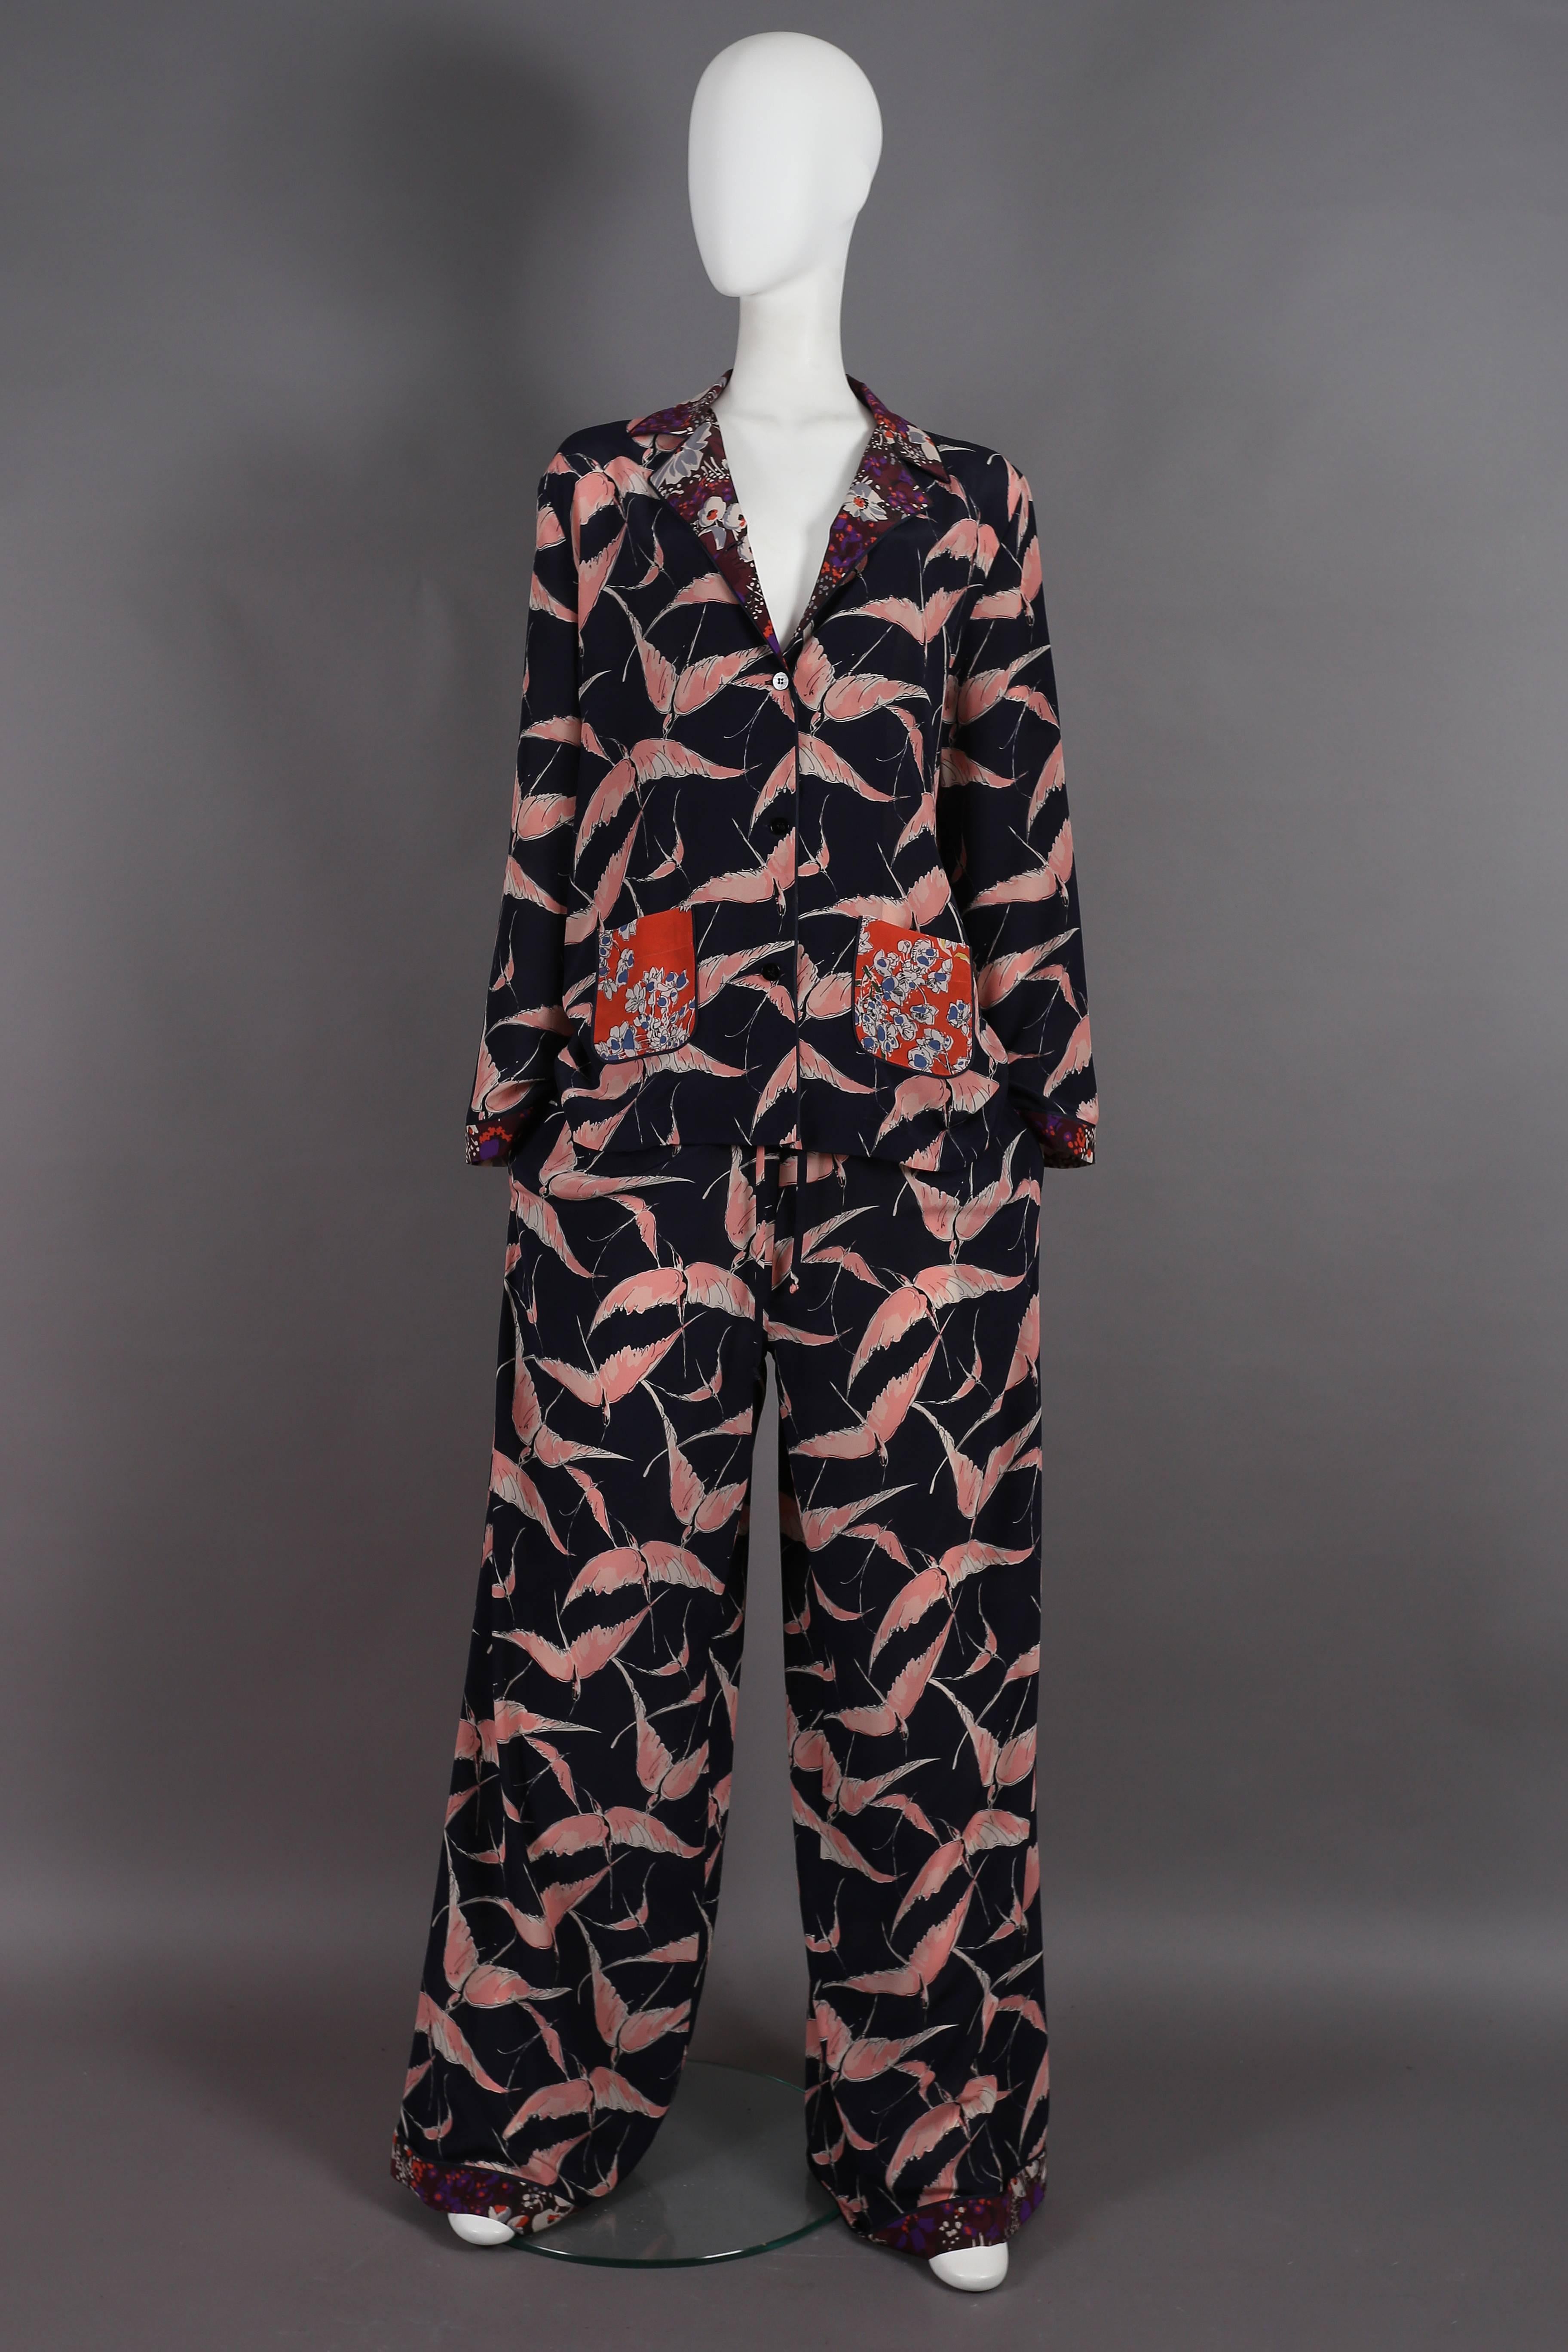 Valentino oriental style silk pant suit from the resort 2016 collection. The suit features a loose fitted jacket with button closure, mix-match printed front pockets and drawstring wide leg pants with two side pockets. 

The suit is labelled large